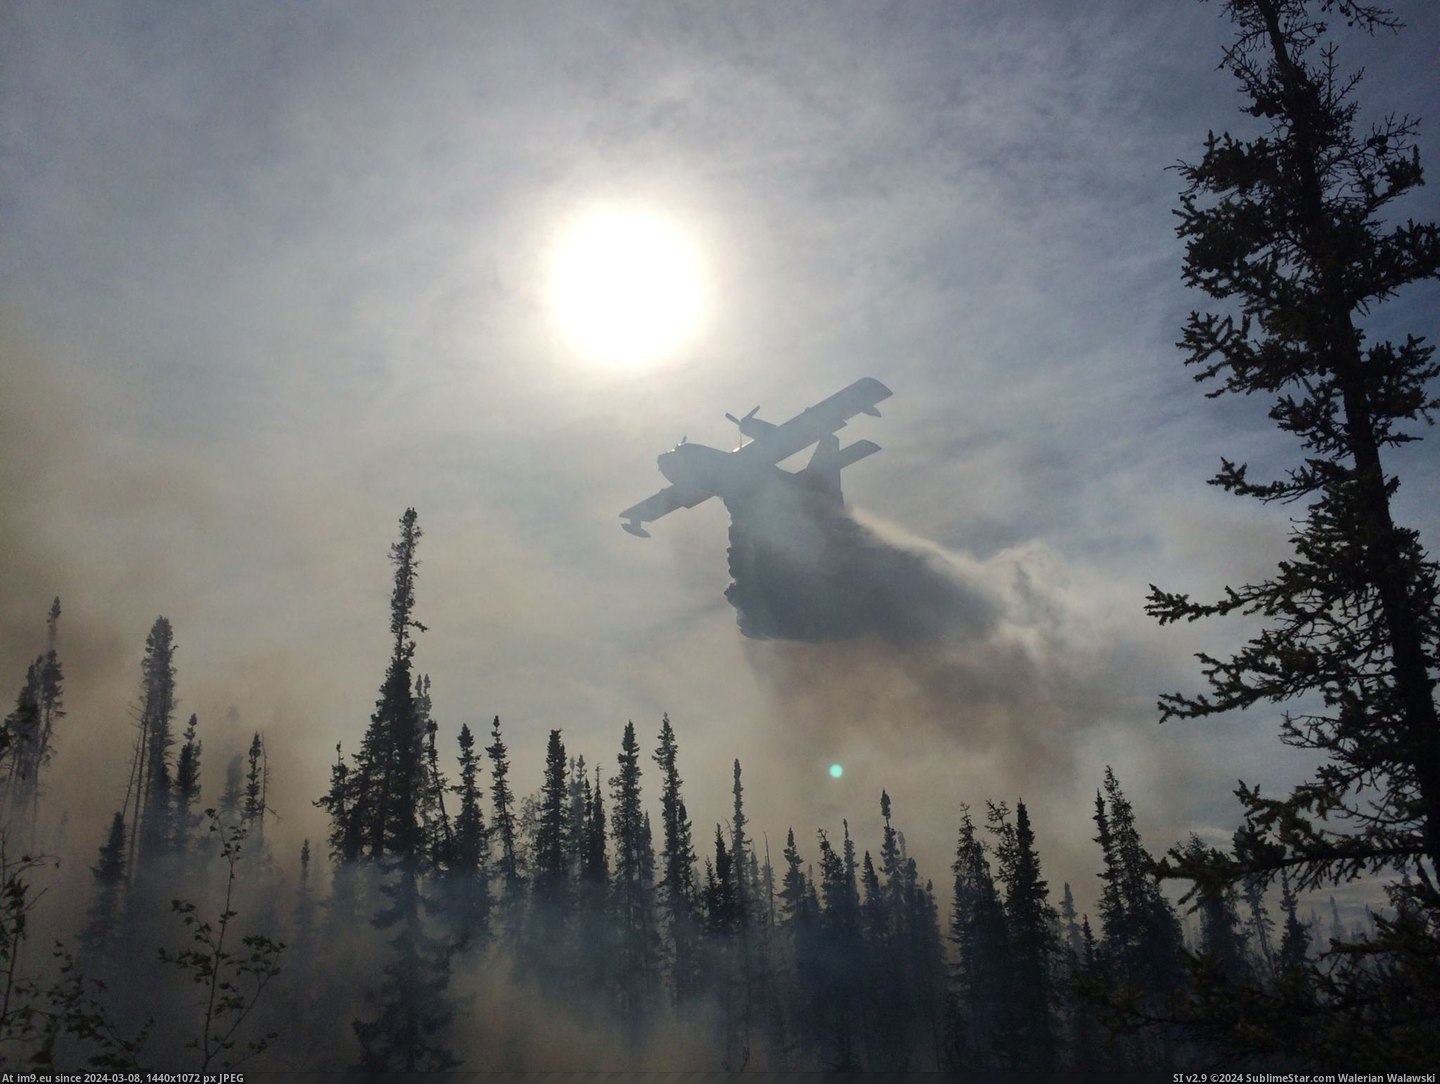 #Fire #Fighting #Fairbanks #Cousin [Pics] My cousin took this while fighting a fire outside of Fairbanks, AK Pic. (Bild von album My r/PICS favs))